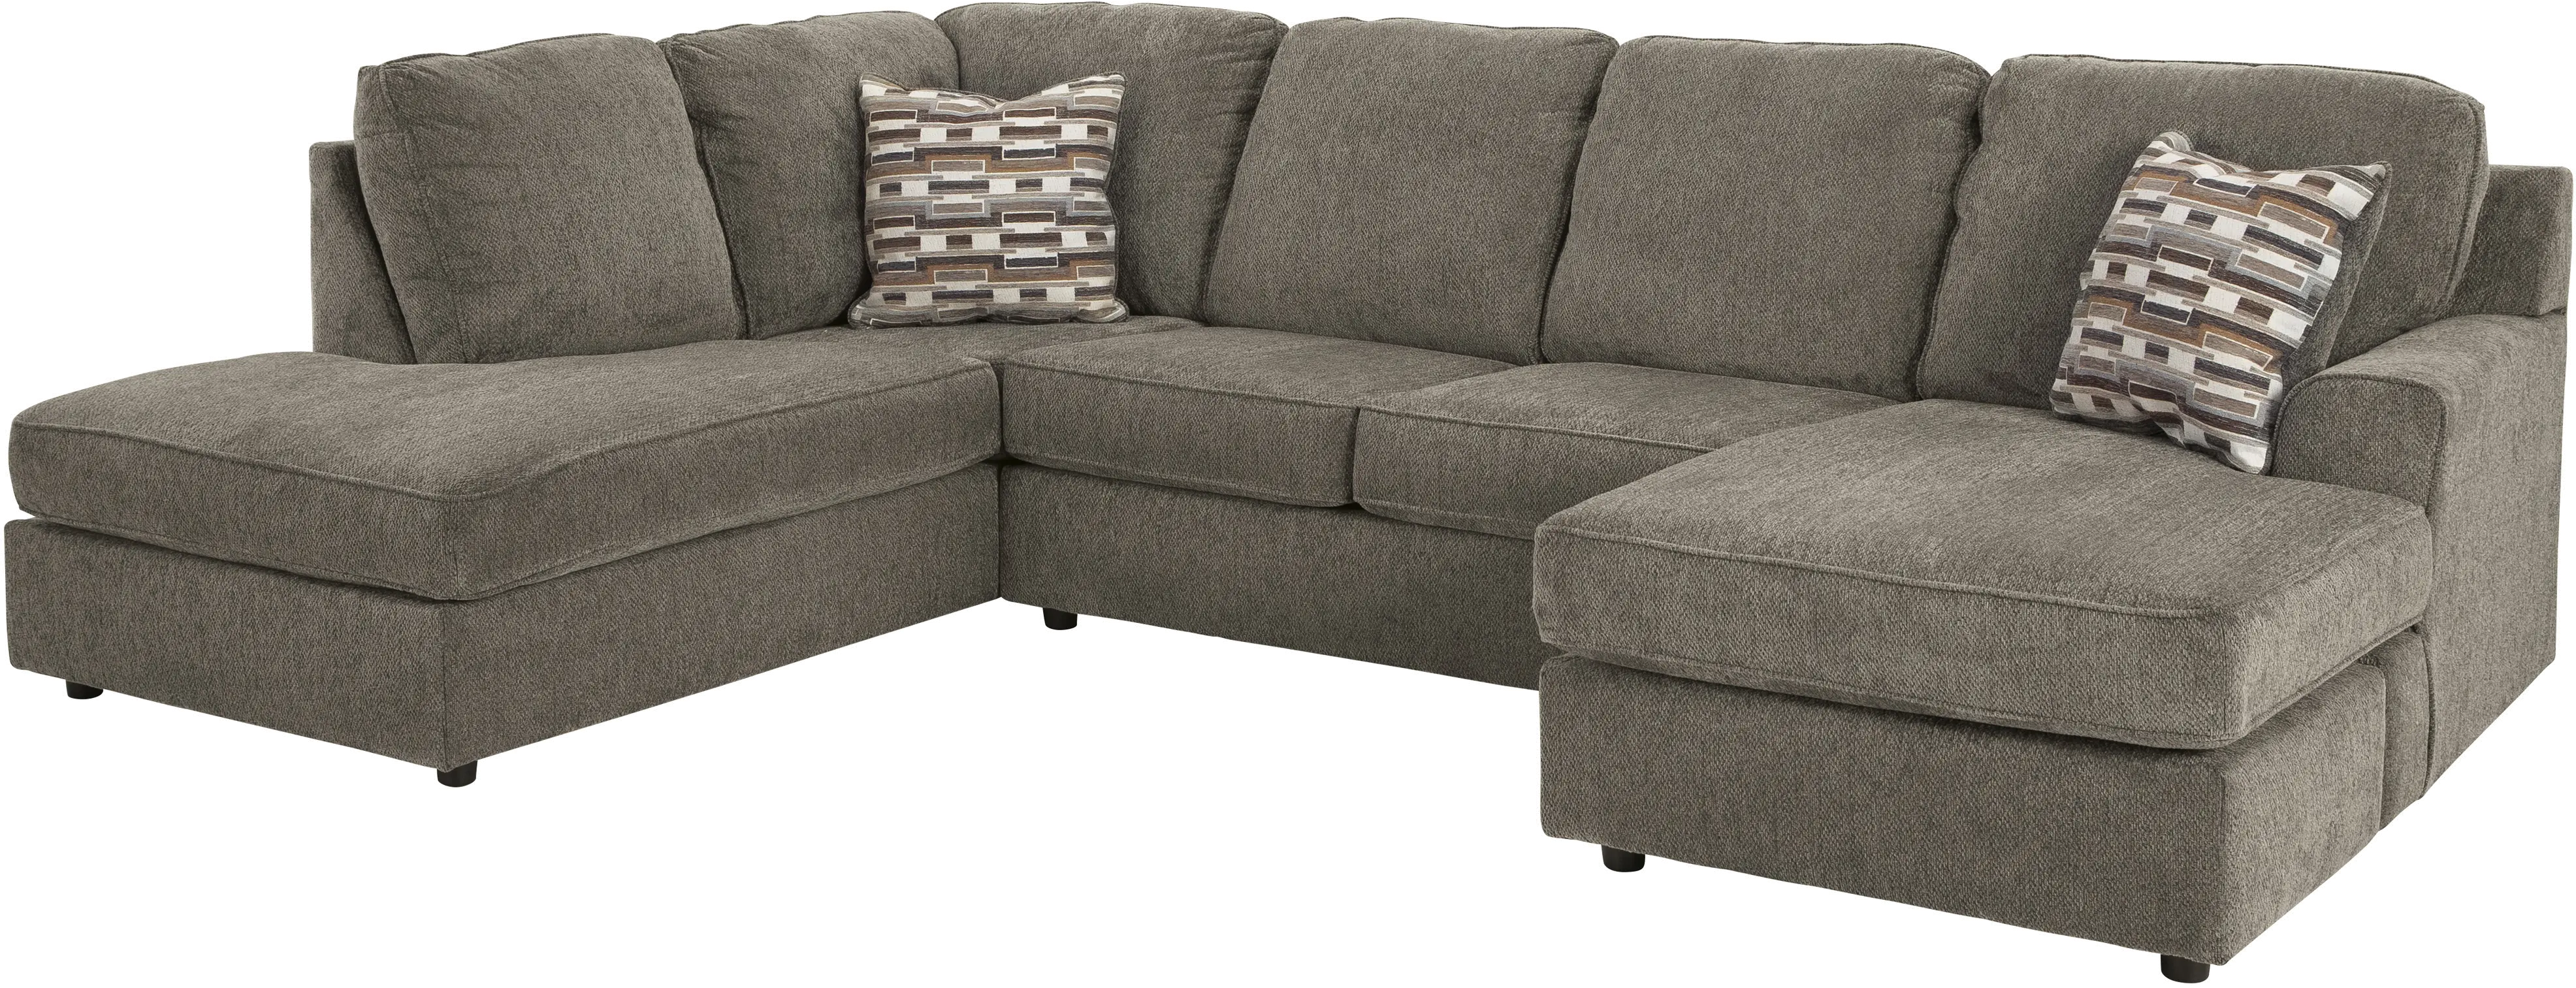 https://static.rcwilley.com/products/112752675/O-Pharrell-Putty-Brown-2-Piece-Sectional-rcwilley-image1.webp